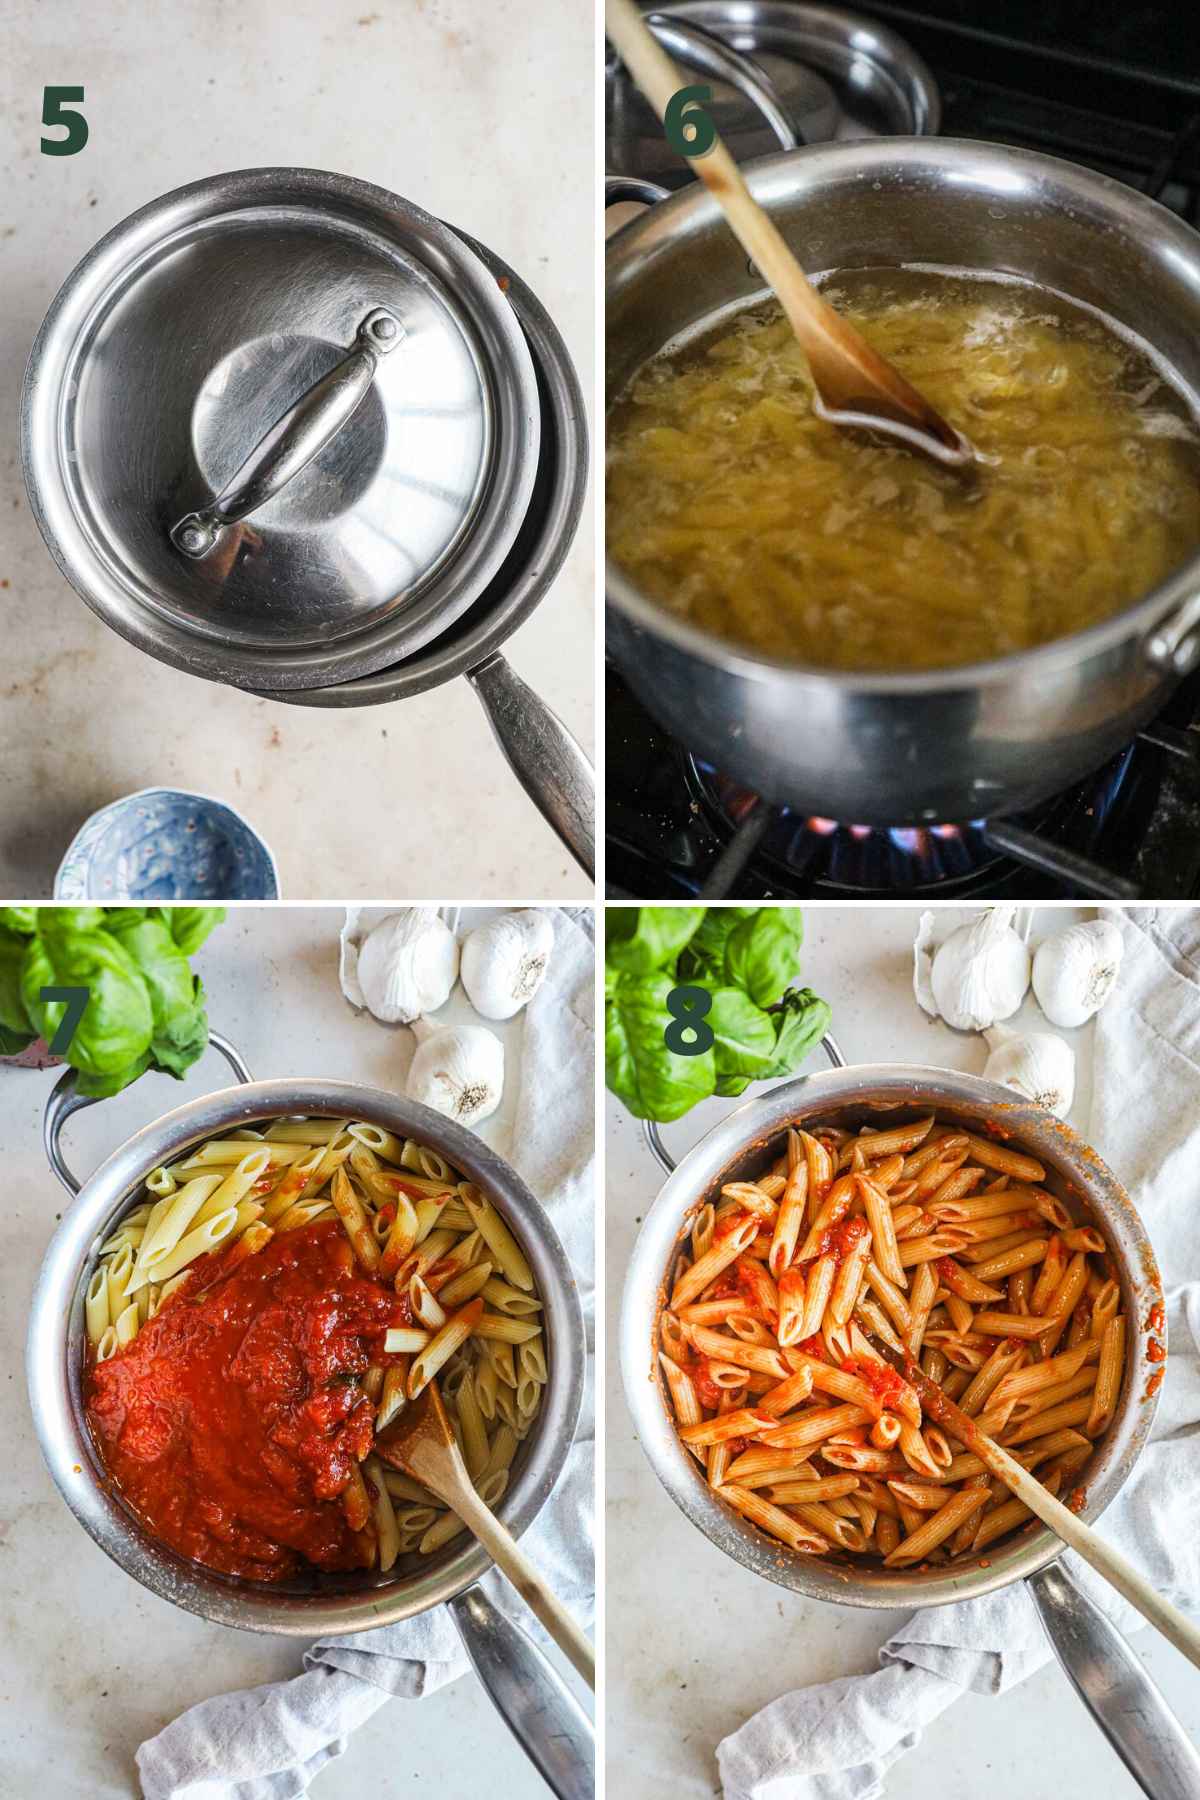 Steps to make authentic penne pomodoro, simmer sauce in the pot with the lid ajar, boil pasta, toss pasta in sauce, and serve with parmigiano reggiano.